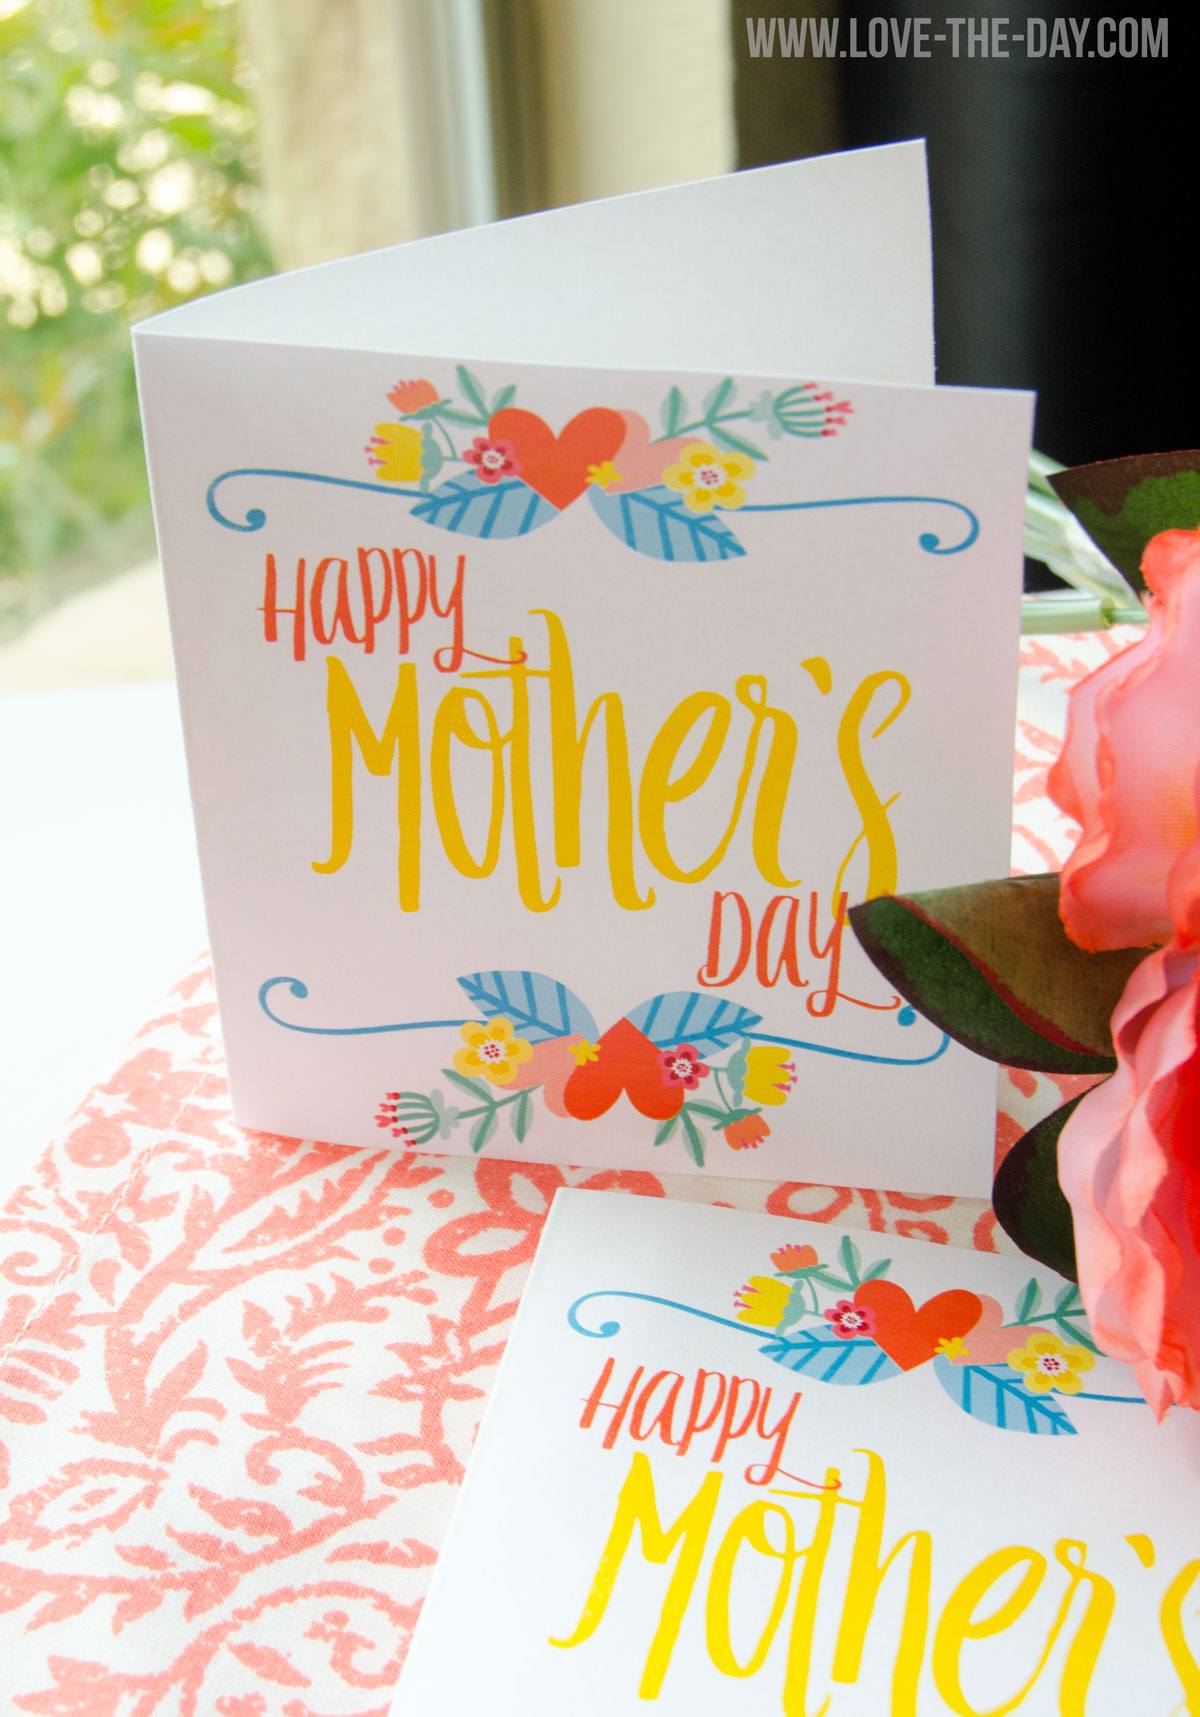 https://love-the-day.com/wp-content/uploads/2015/05/Mothers-Day-Card3.jpg